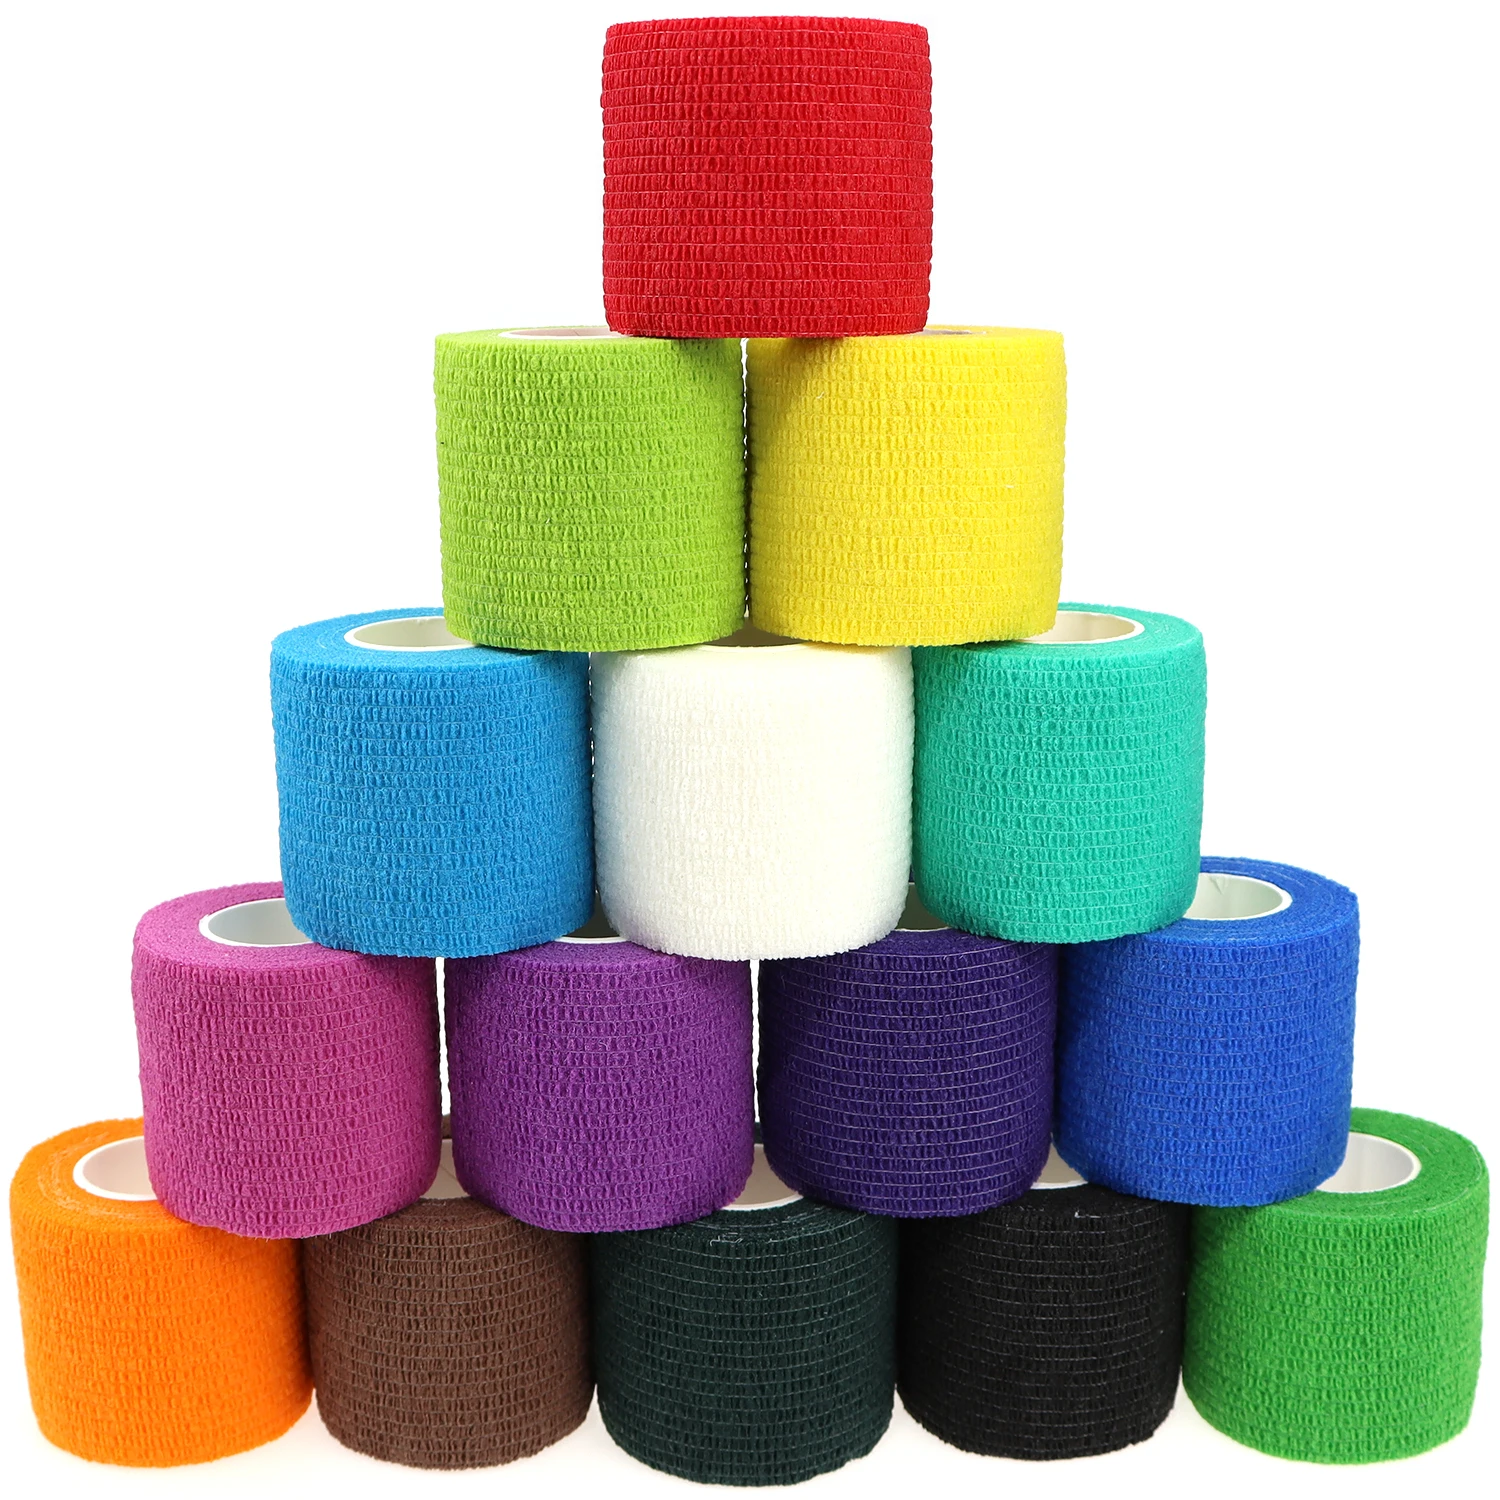 

24 Pieces Elastic Bandage Tapes Athletic Tape Elastoplast Sports Recovery Strapping Gym Waterproof Muscle Relief Finger Ankle